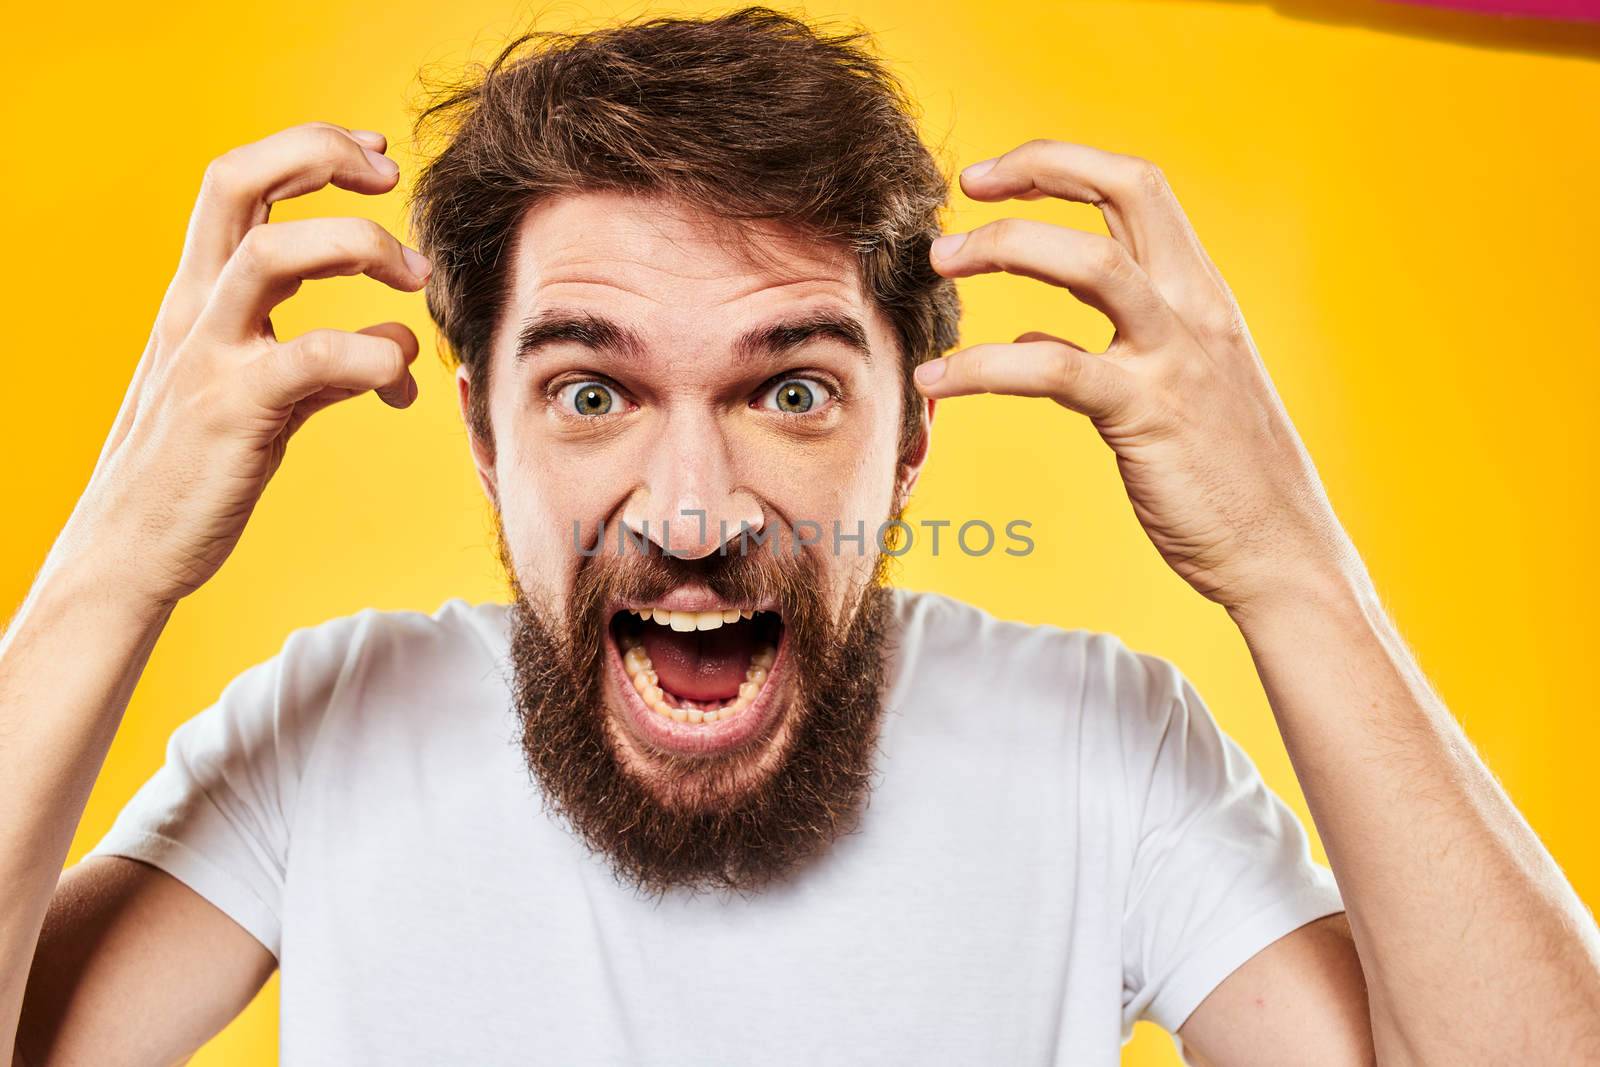 bearded man gesturing with hands studio lifestyle discontent yellow background. High quality photo